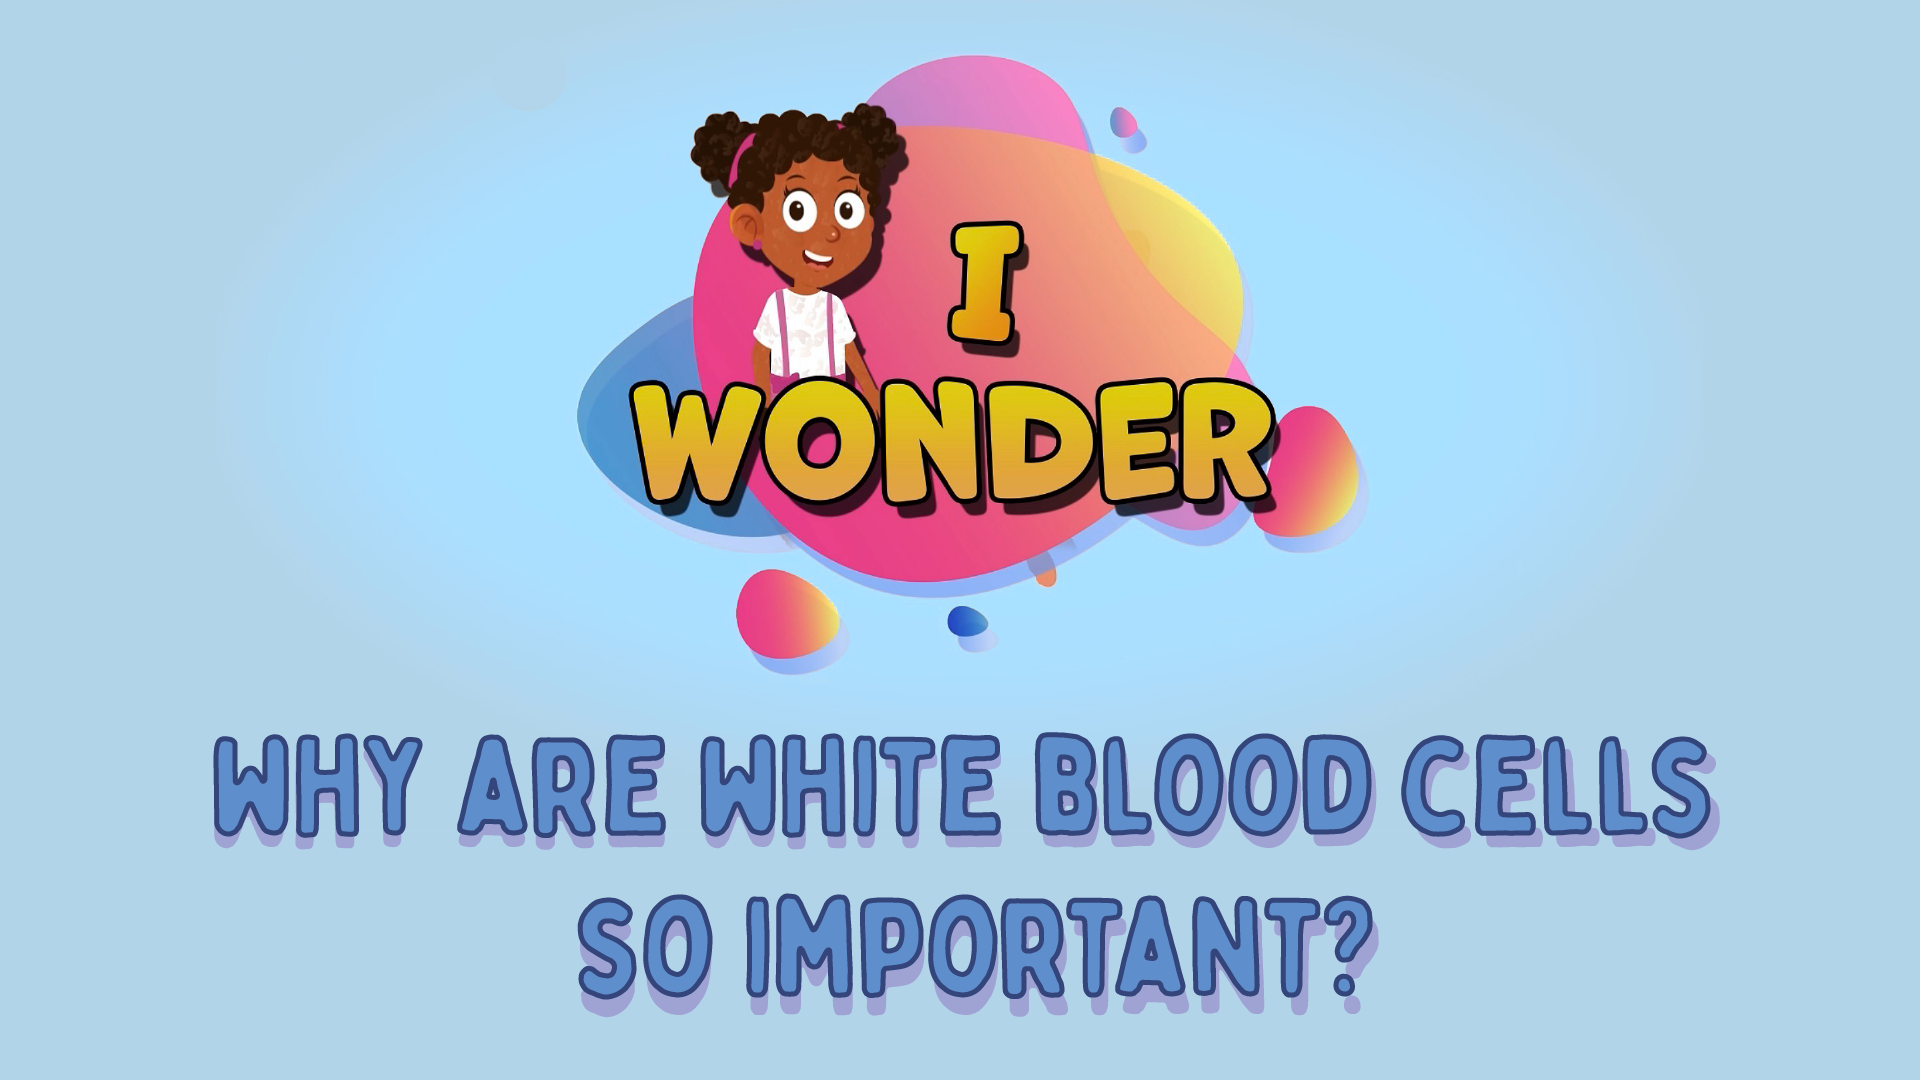 Why Are White Blood Cells So Important?